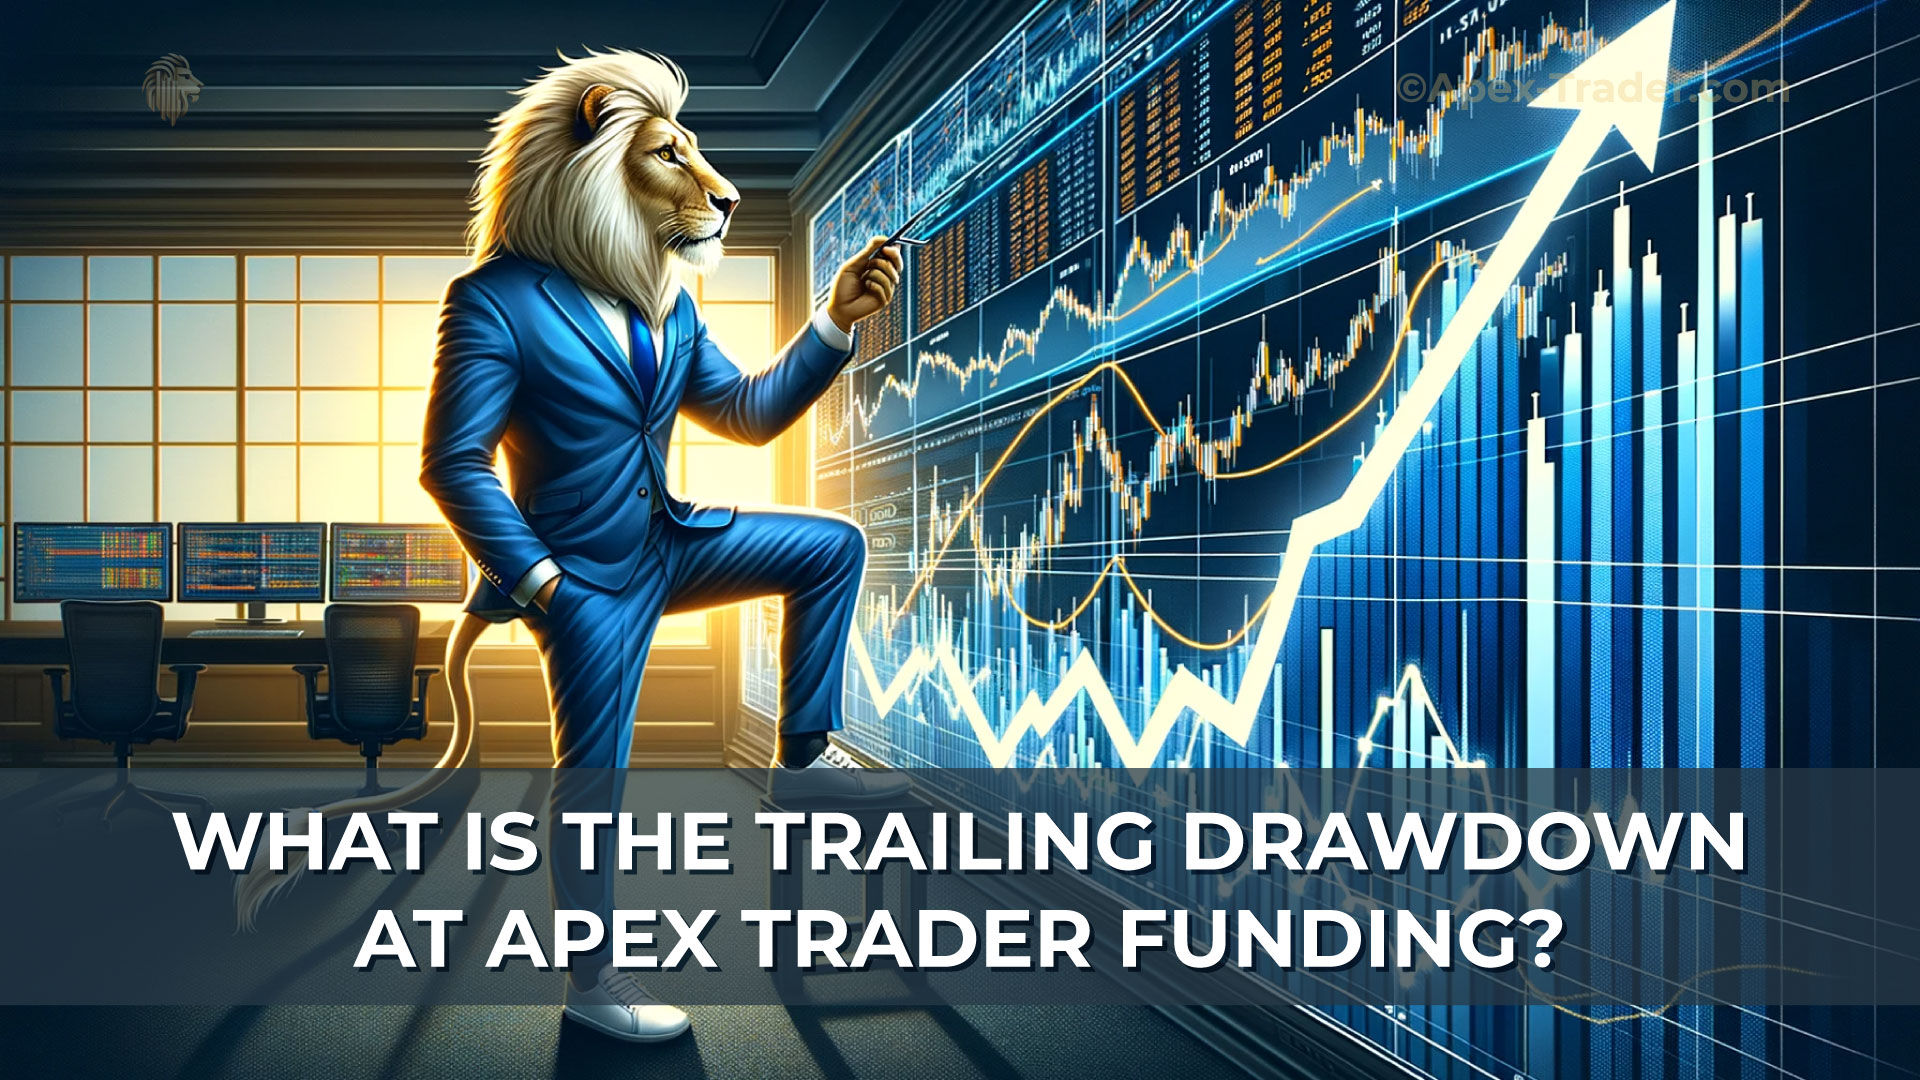 What-is-the-Trailing-Drawdown-at-Apex-Trader-Funding-On-Apex-Trader-Website